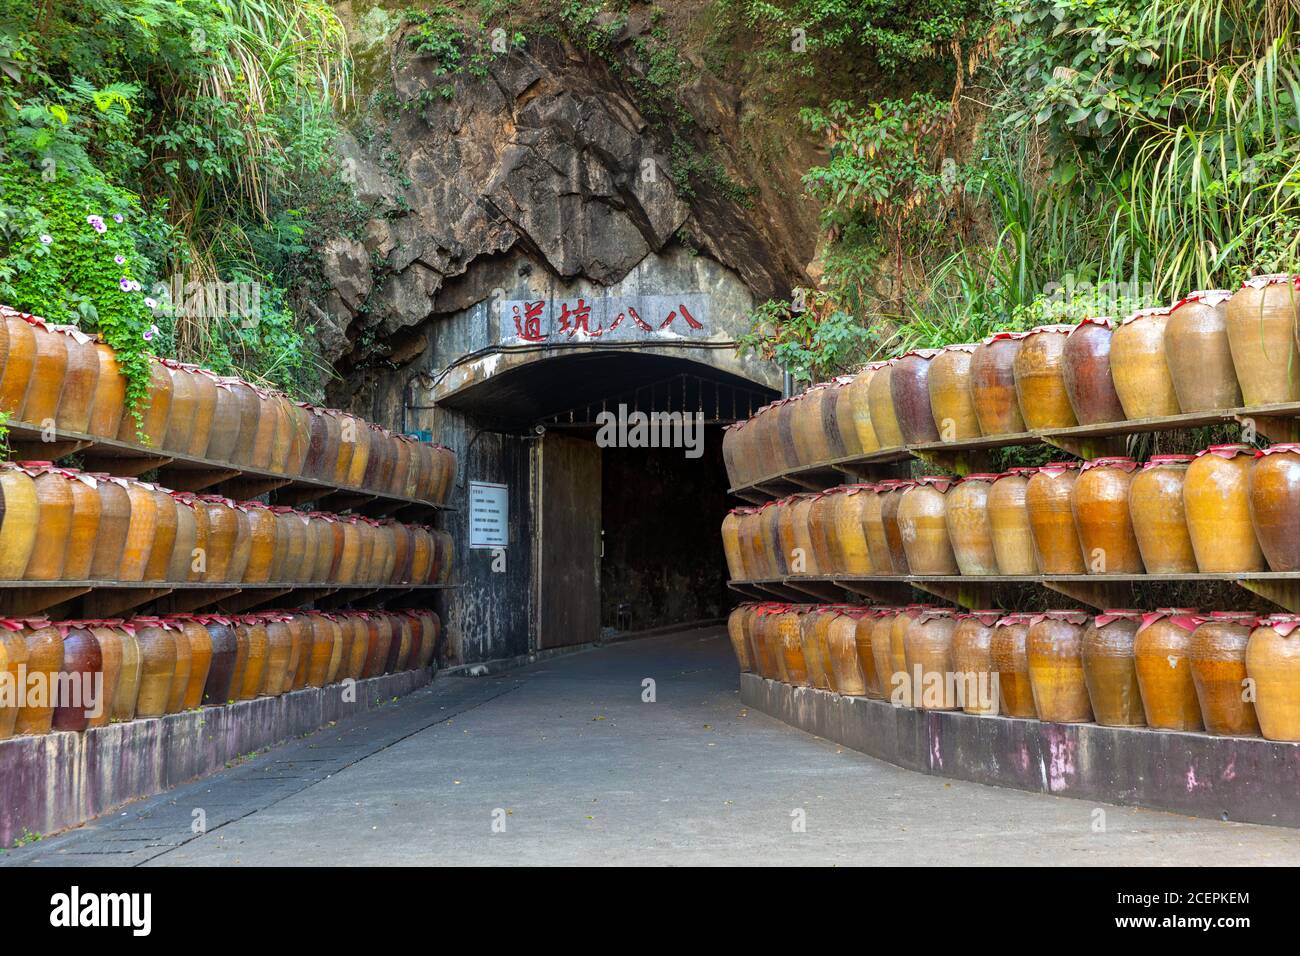 Tunnel 88, used for storage of locally distilled alcohol and spirits, tourist attraction on Nangan Island of Matsu in Taiwan. The Chinese text on the Stock Photo